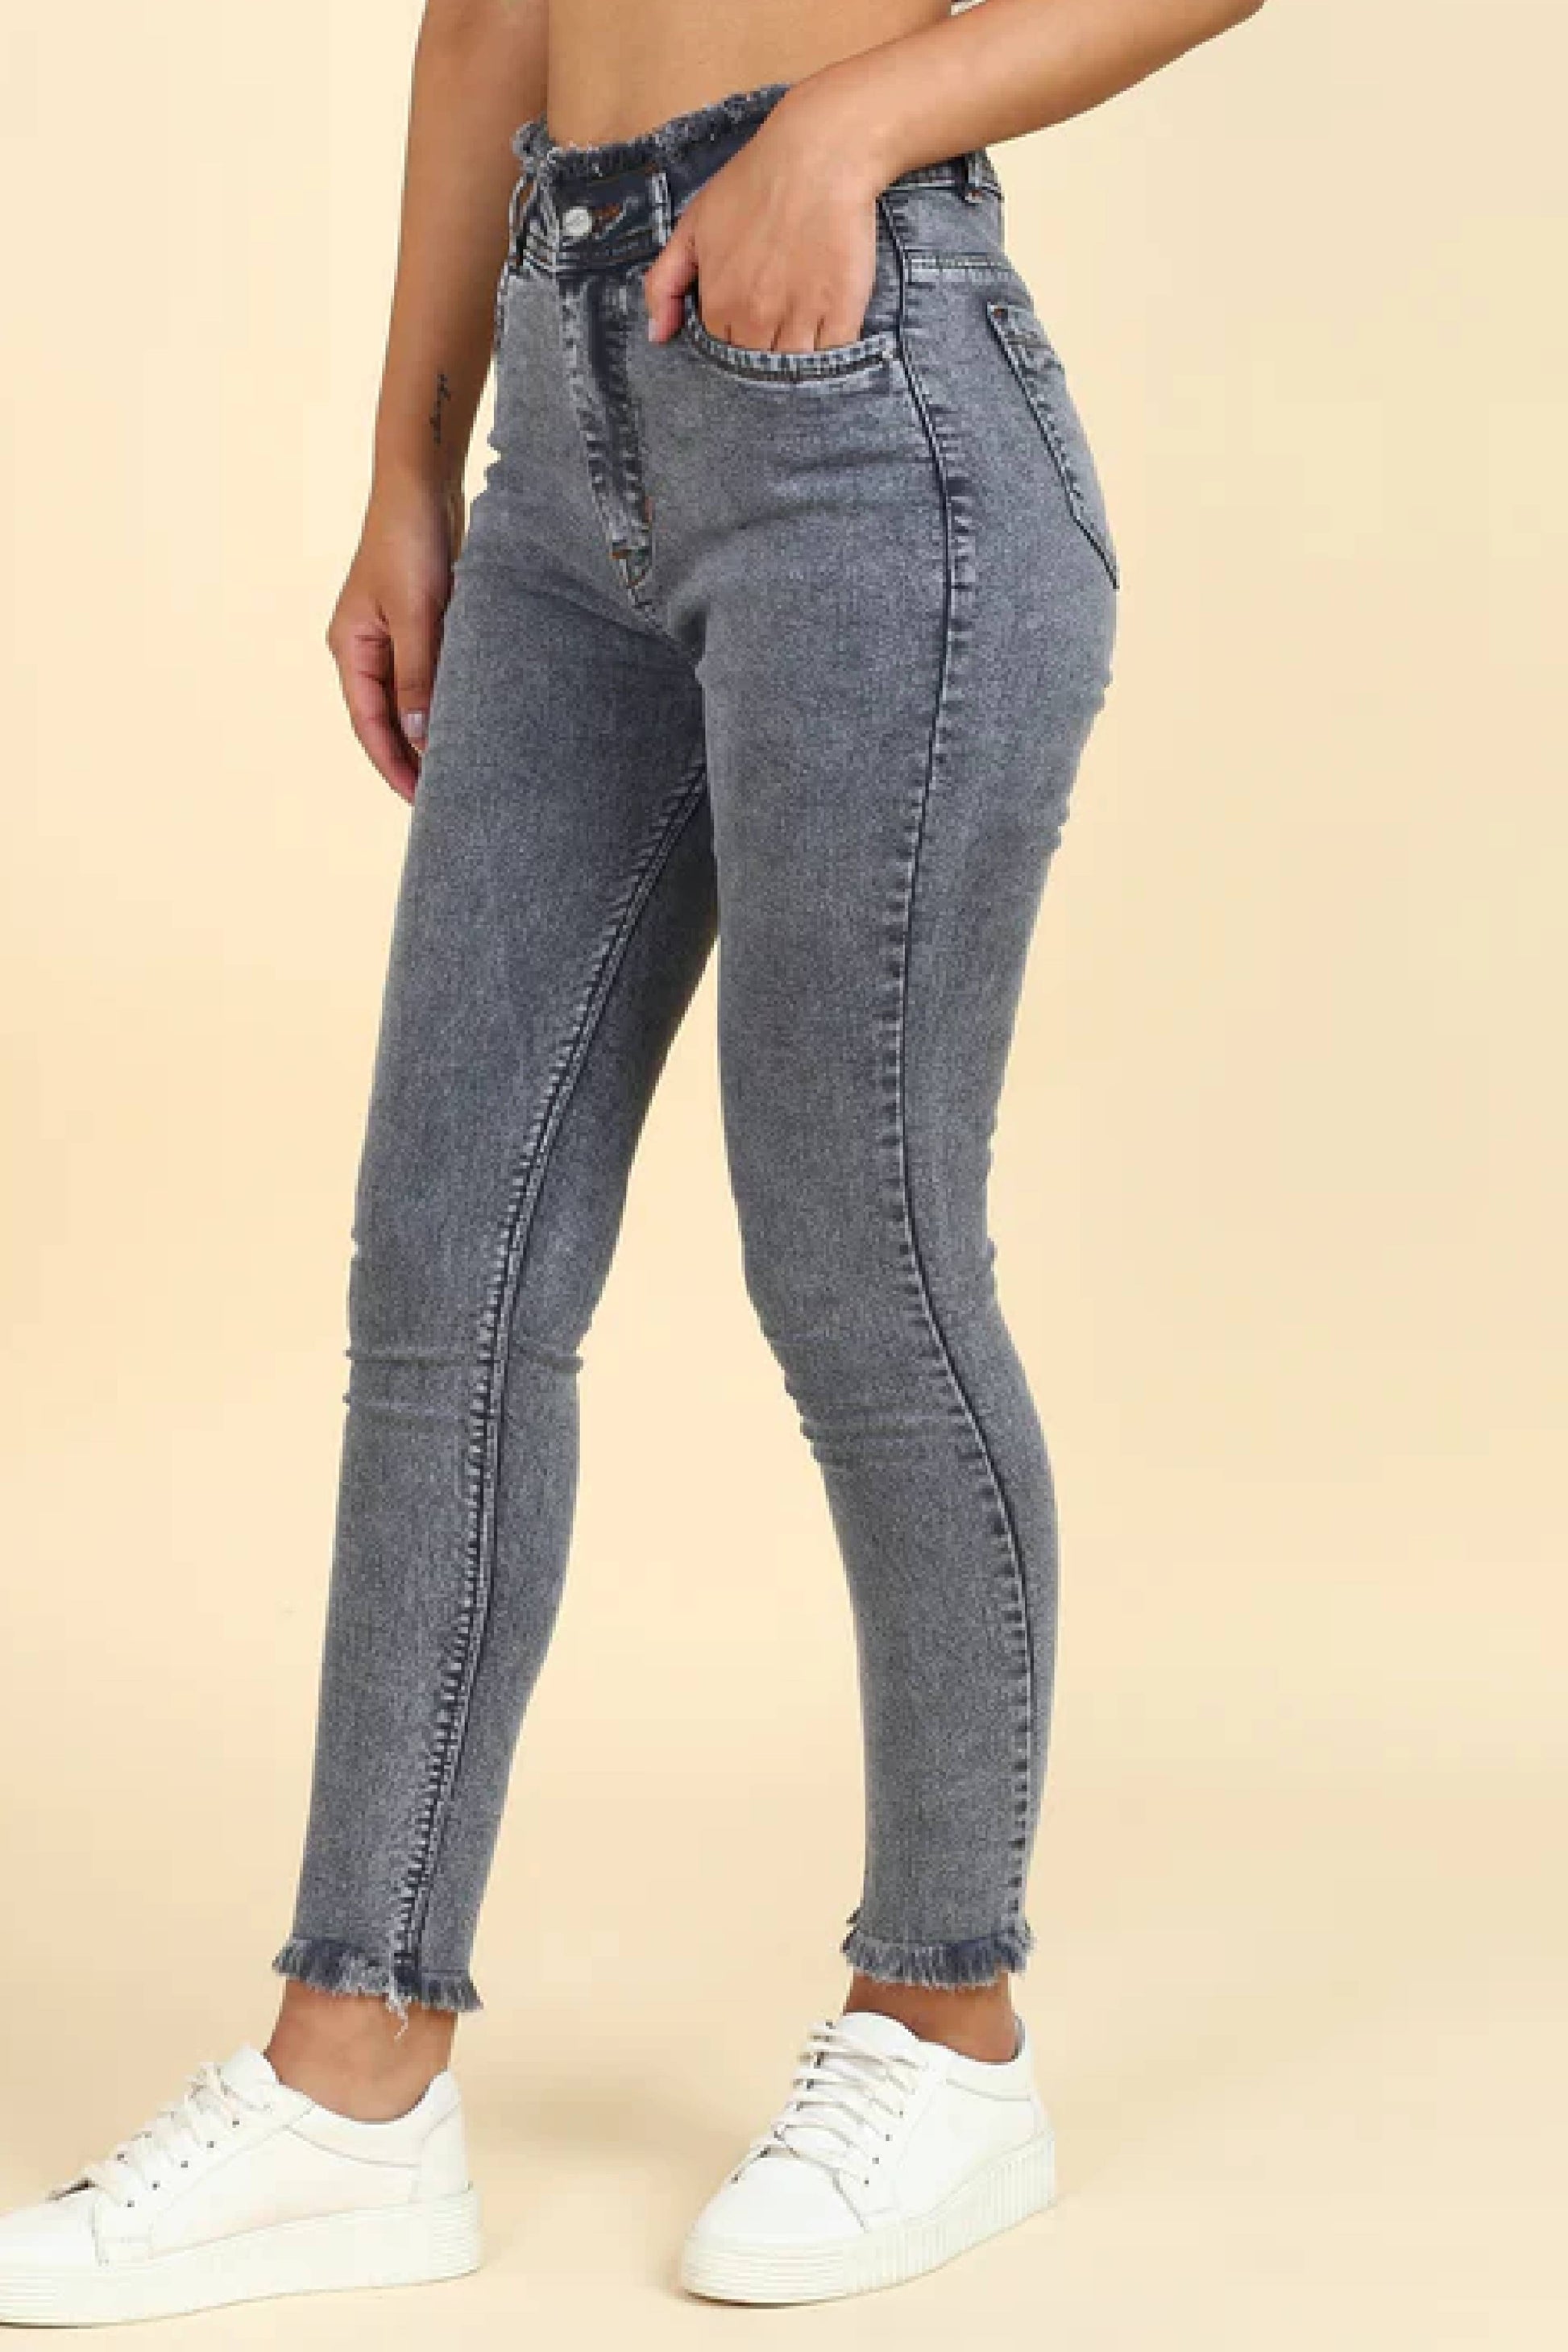 Ladies jeans and tops uae online shopping dubai